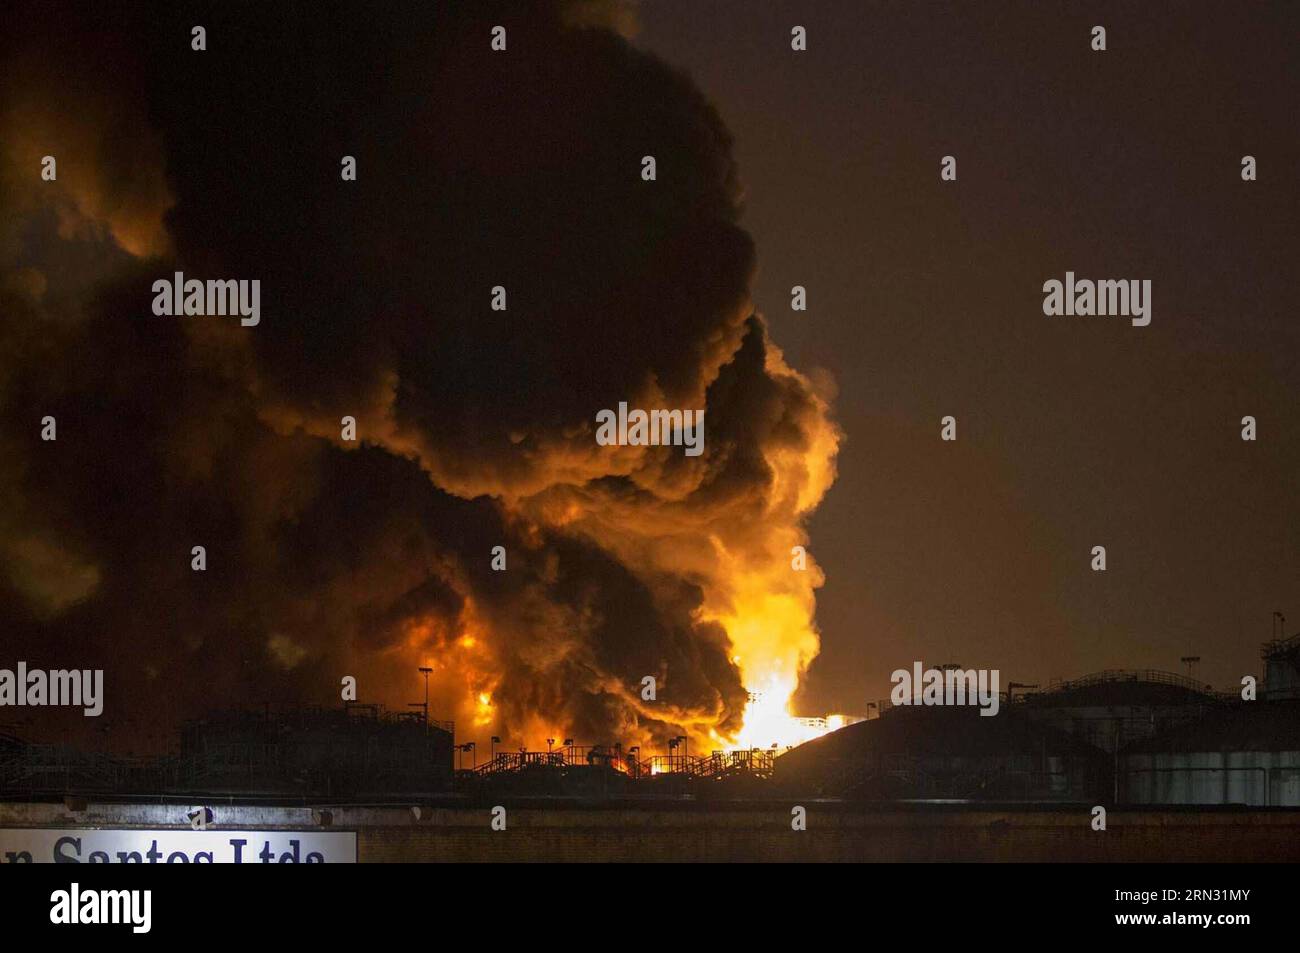 Smoke rise during a fire in a fuel tank storage facility in Santos, Sao Paulo state, Brazil, on April 2, 2015. A big fire affected a tank storage facility in Brazil s port of Santos, after an explosion in one of the tank whose causes have not yet been clarified. Marcelo Goncalves/AGENCIA ESTADO) BRAZIL-SAO PAULO-ACCIDENT-FIRE AE PUBLICATIONxNOTxINxCHN   Smoke Rise during a Fire in a Fuel Tank Storage Facility in Santos Sao Paulo State Brazil ON April 2 2015 a Big Fire Affected a Tank Storage Facility in Brazil S Port of Santos After to Explosion in One of The Tank whose Causes have Not yet bee Stock Photo